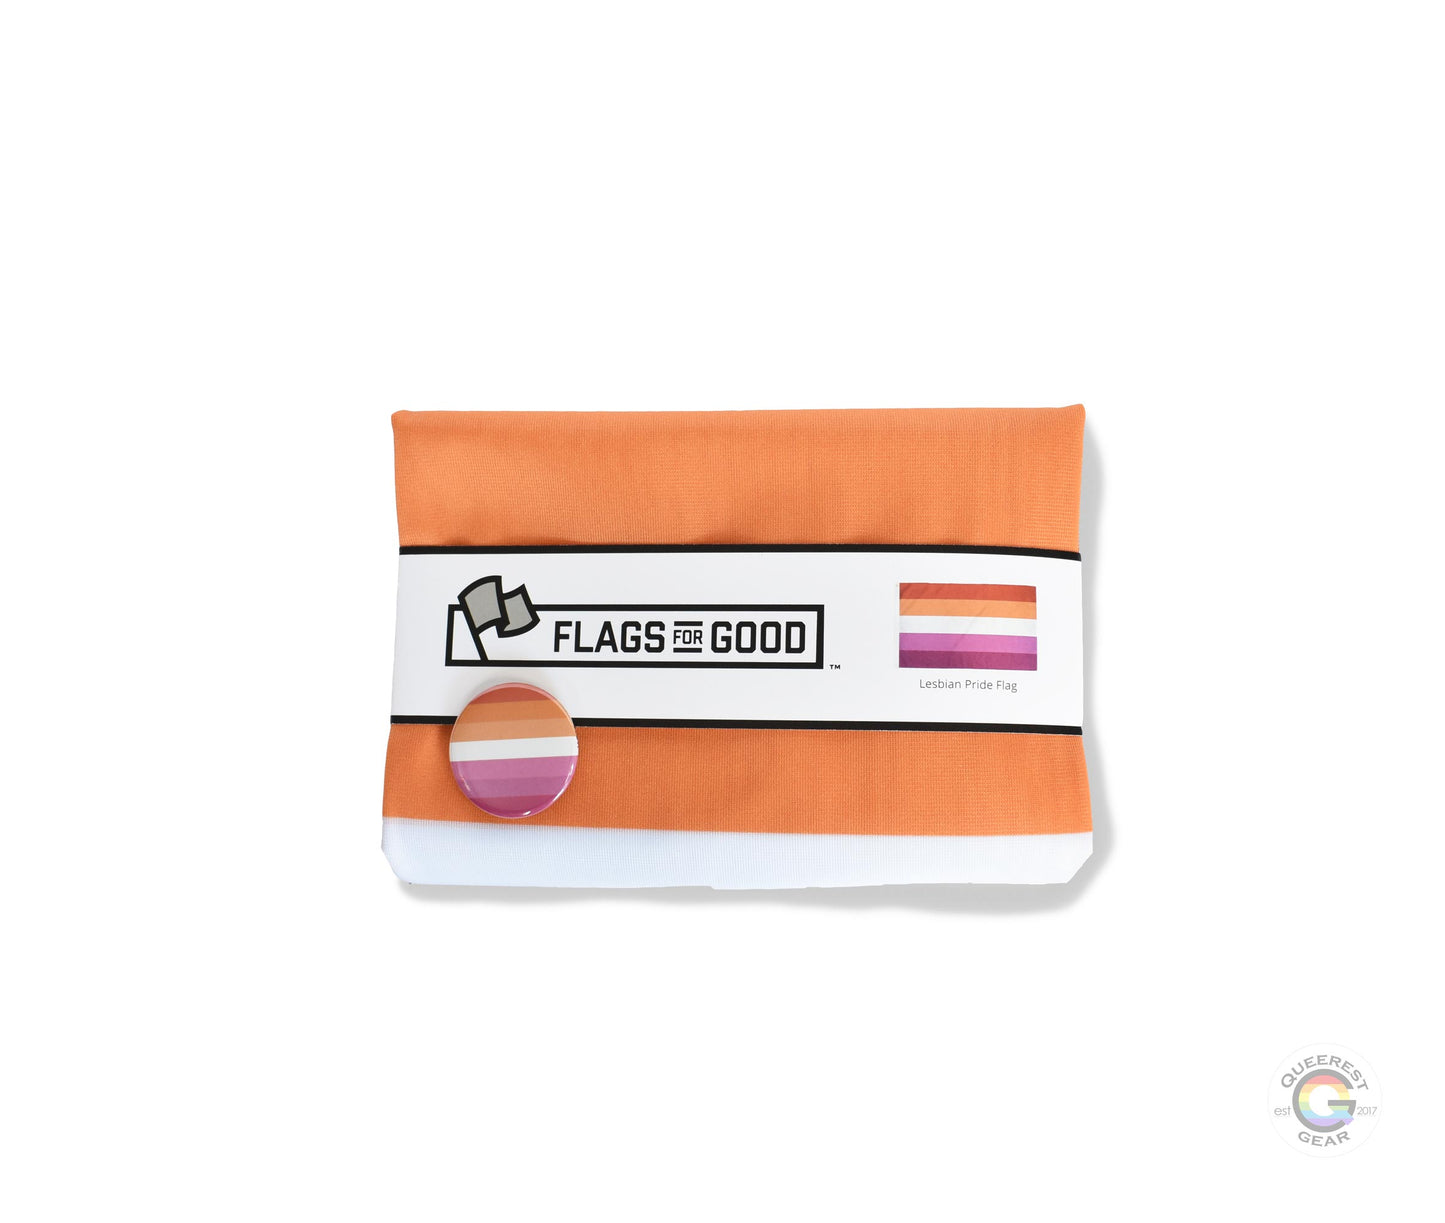  The lesbian pride flag folded in its packaging with the matching free lesbian flag button